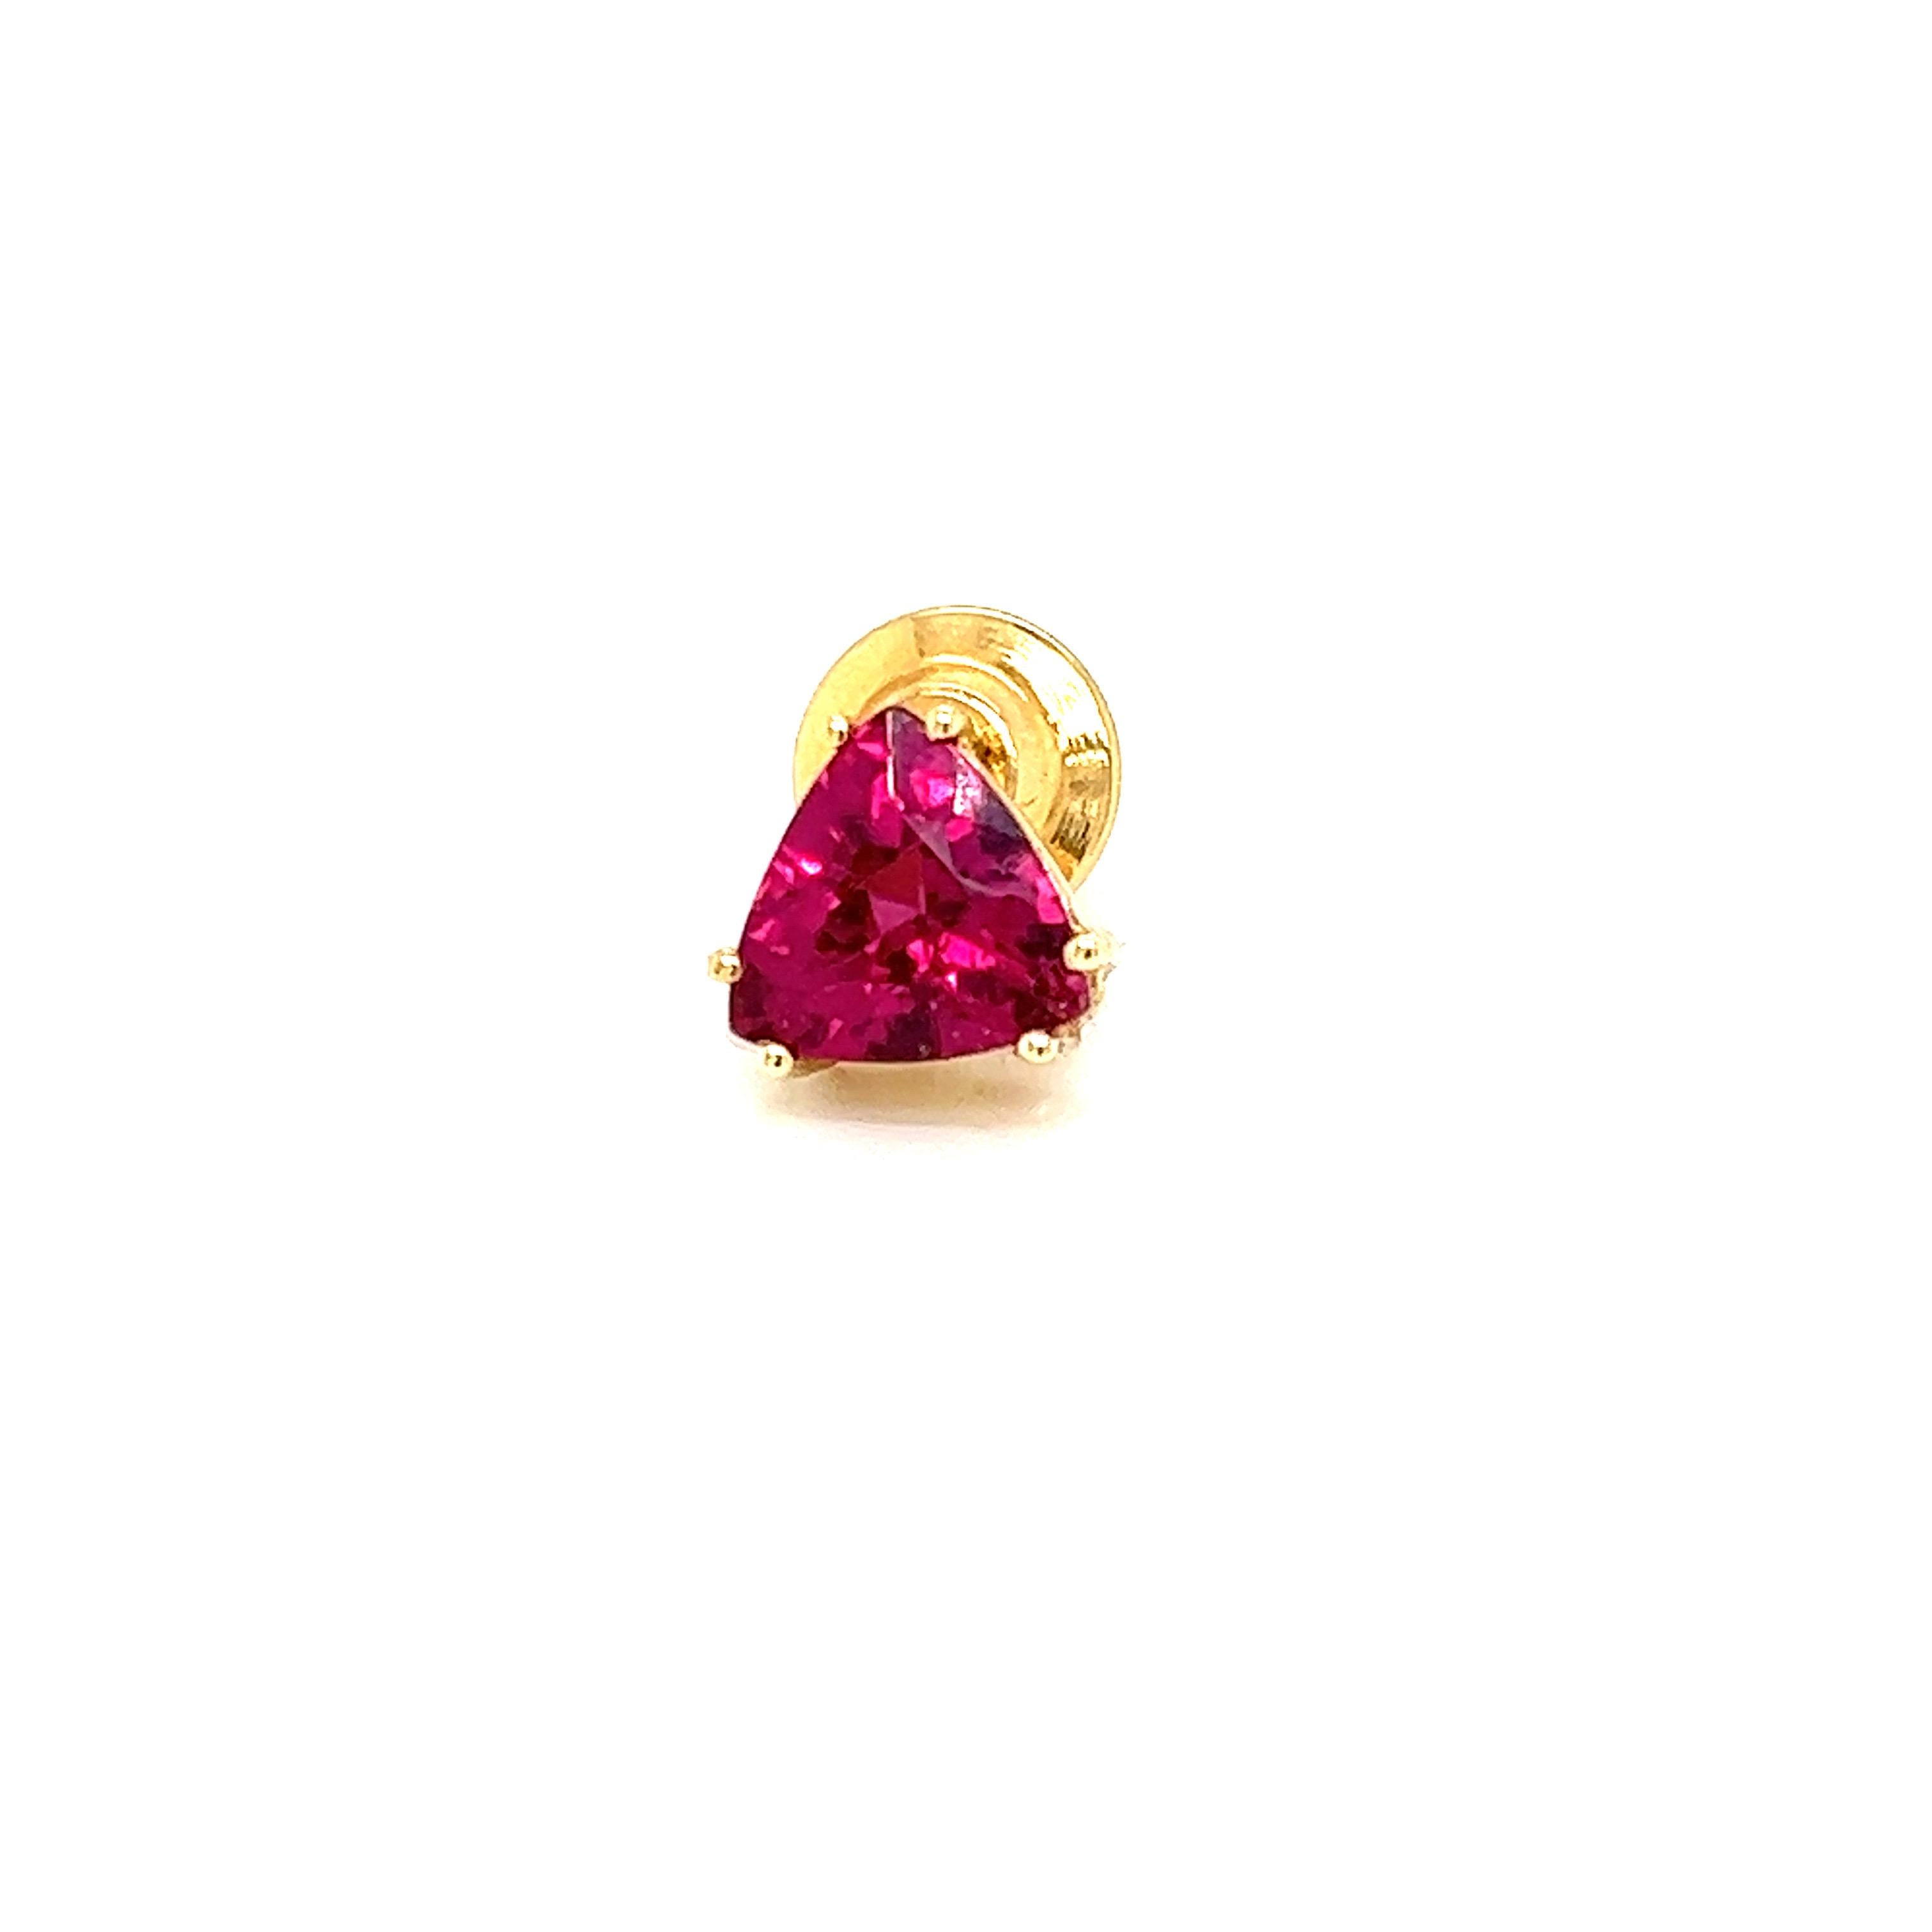 Elevate your style with this stunning Pink Tourmaline Rubellite Trillion Lapel Pin/Tie Tack, exquisitely set in 18k Yellow Gold. This unique accessory combines the allure of a rare pink tourmaline gemstone with the timeless elegance of fine jewelry